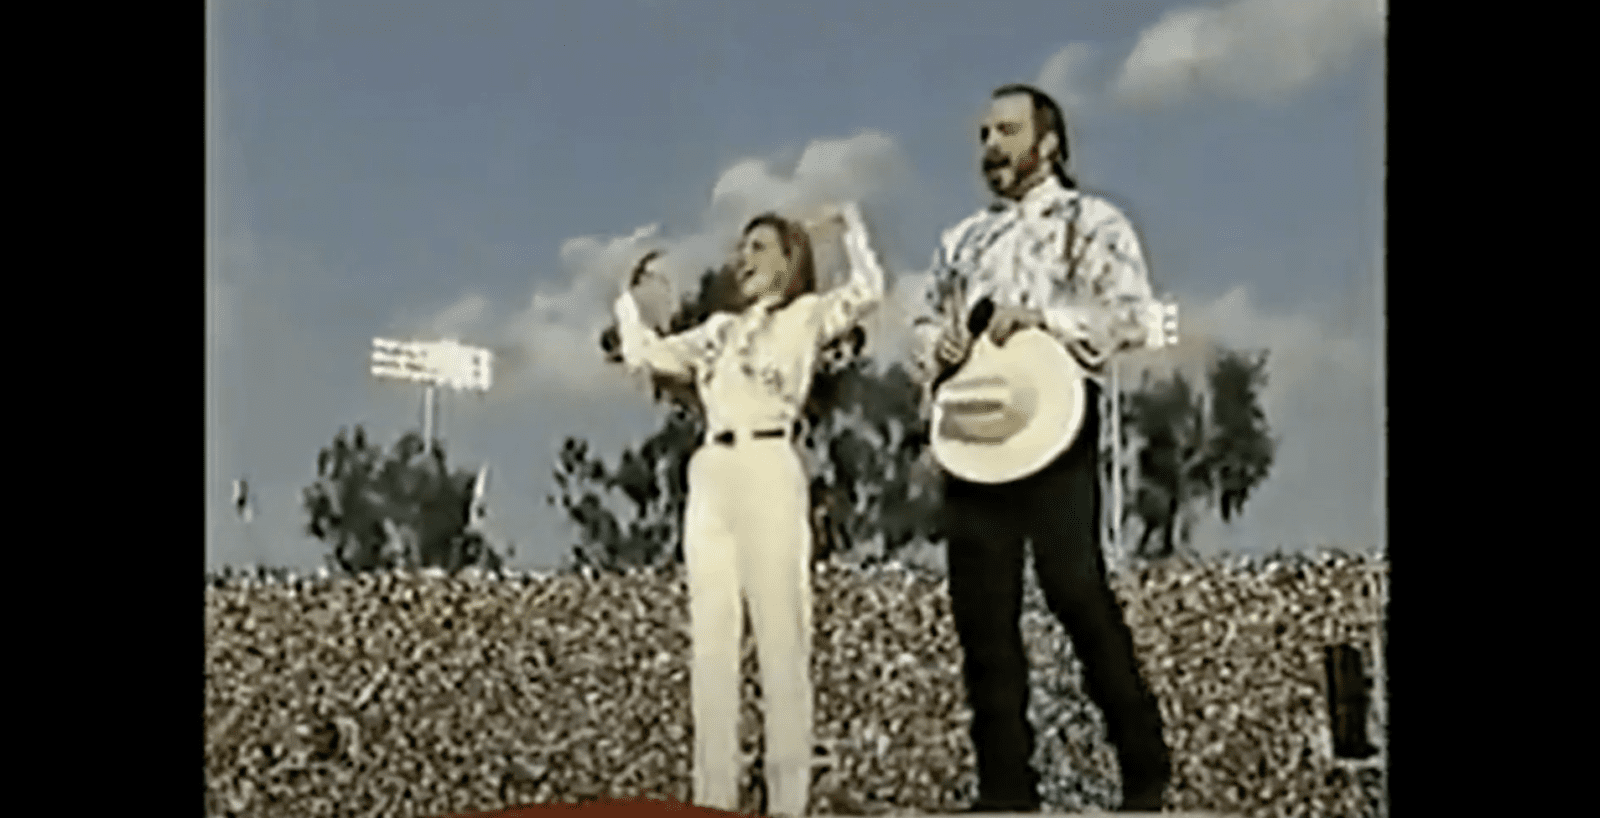 Marlee Matlin performs the national anthem in ASL. She is dressed in a cream colored shirt and pants with a belt and has her arms raised in fists bent at the elbow. Garth Brooks sings next to her holding his cream colored cowboy hat and has a dark beard, light shirt and black pants. A large superbowl crowd is behind them.